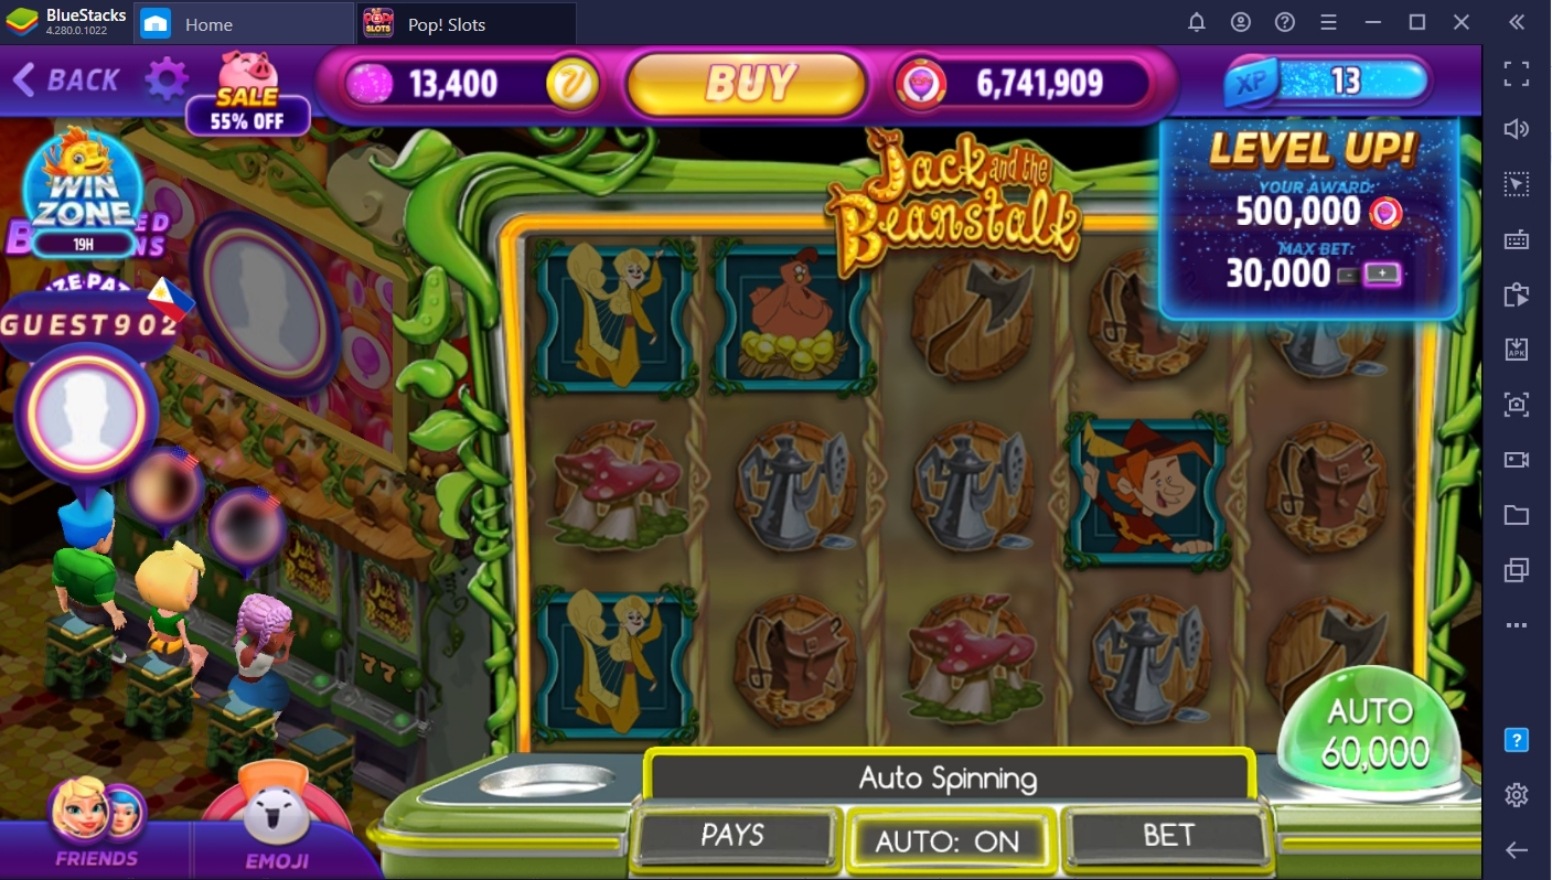 Guide to Getting More Chips in POP! Slots Vegas Casino Games